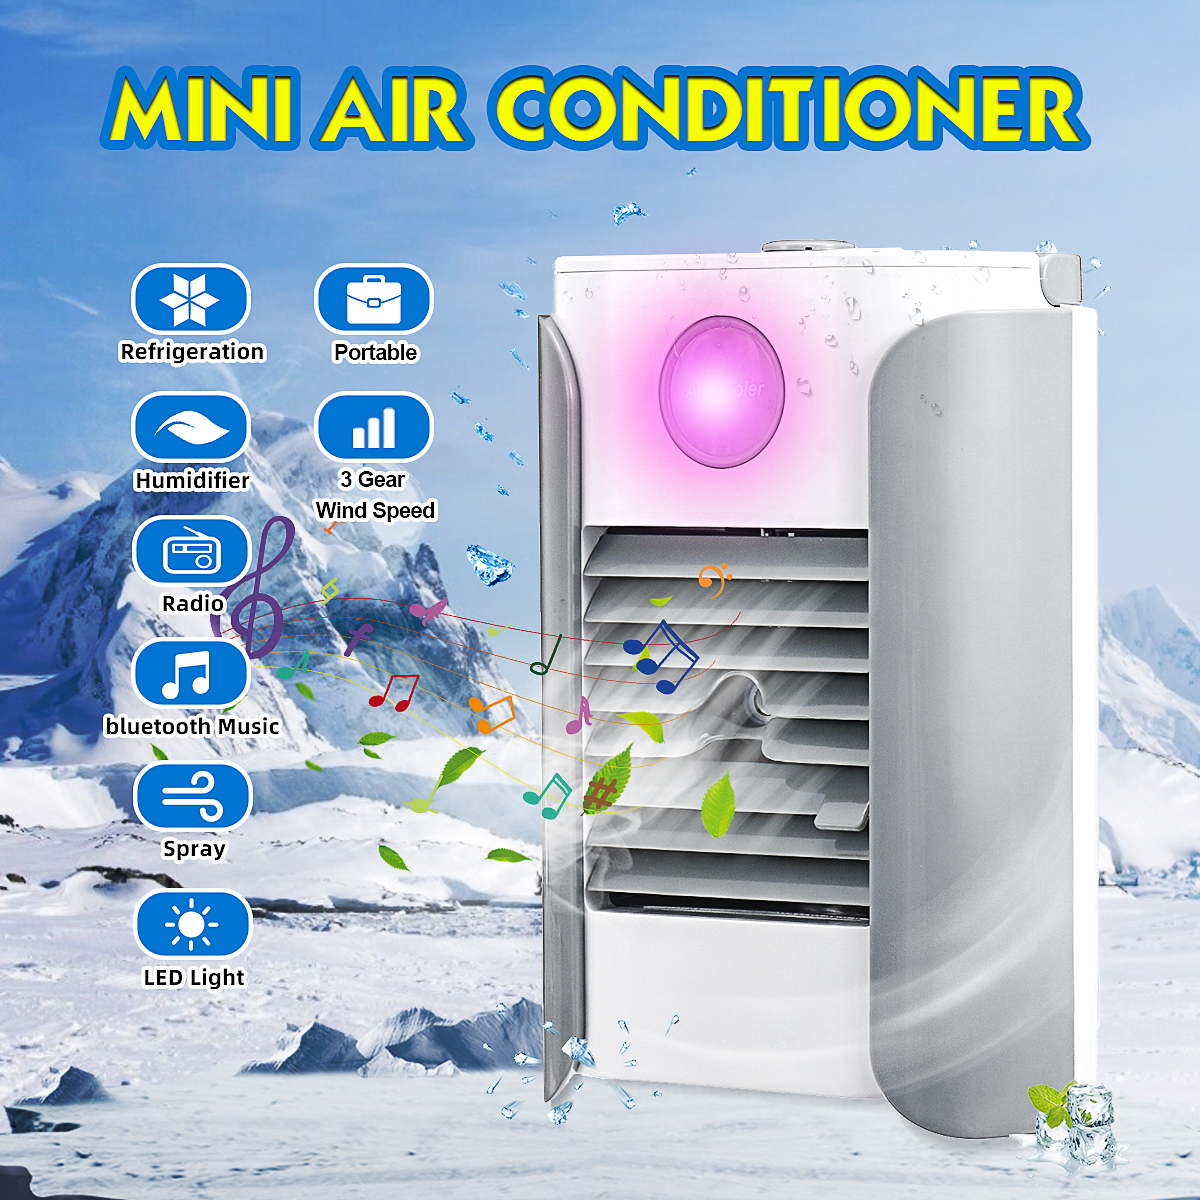 USB-Mini-Portable-Bluetooth-Radio-Air-Cooler-Humidifier-Conditioning-Mute-Spray-Cooling-Fan-1690137-2